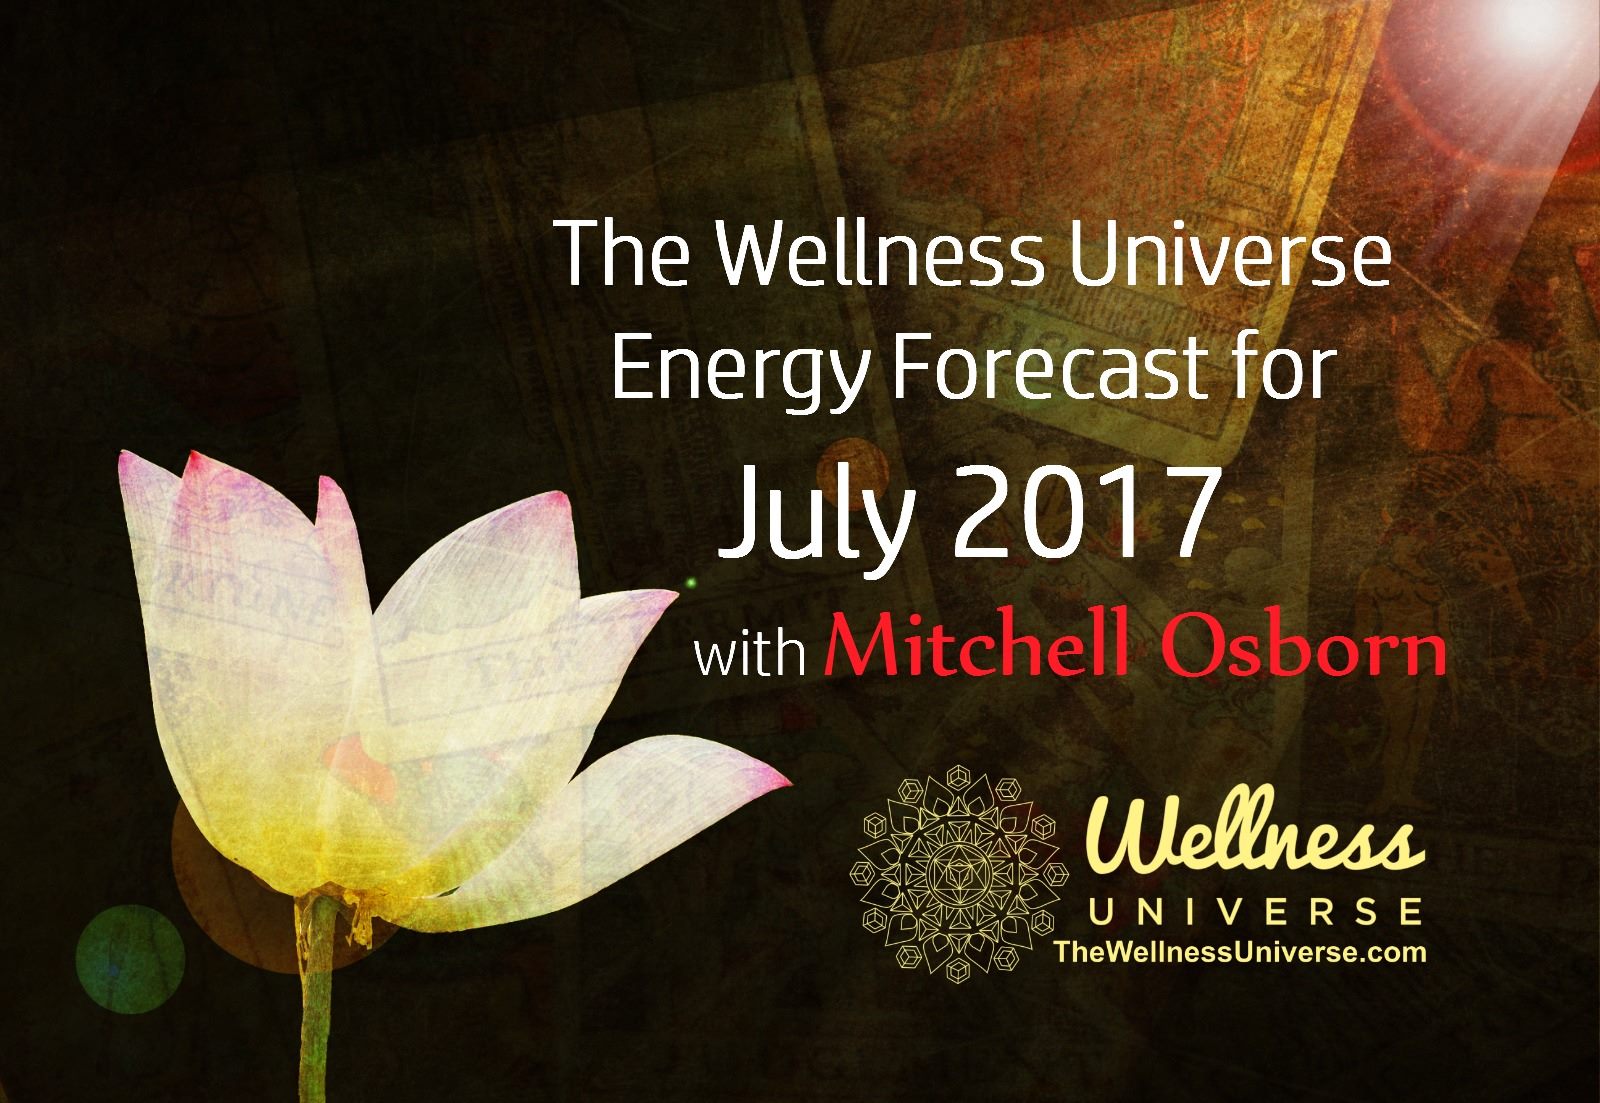 Energy Forecast for July with Mitchell Osborn #TheWellnessUniverse #WUVIP #ForecastForJuly